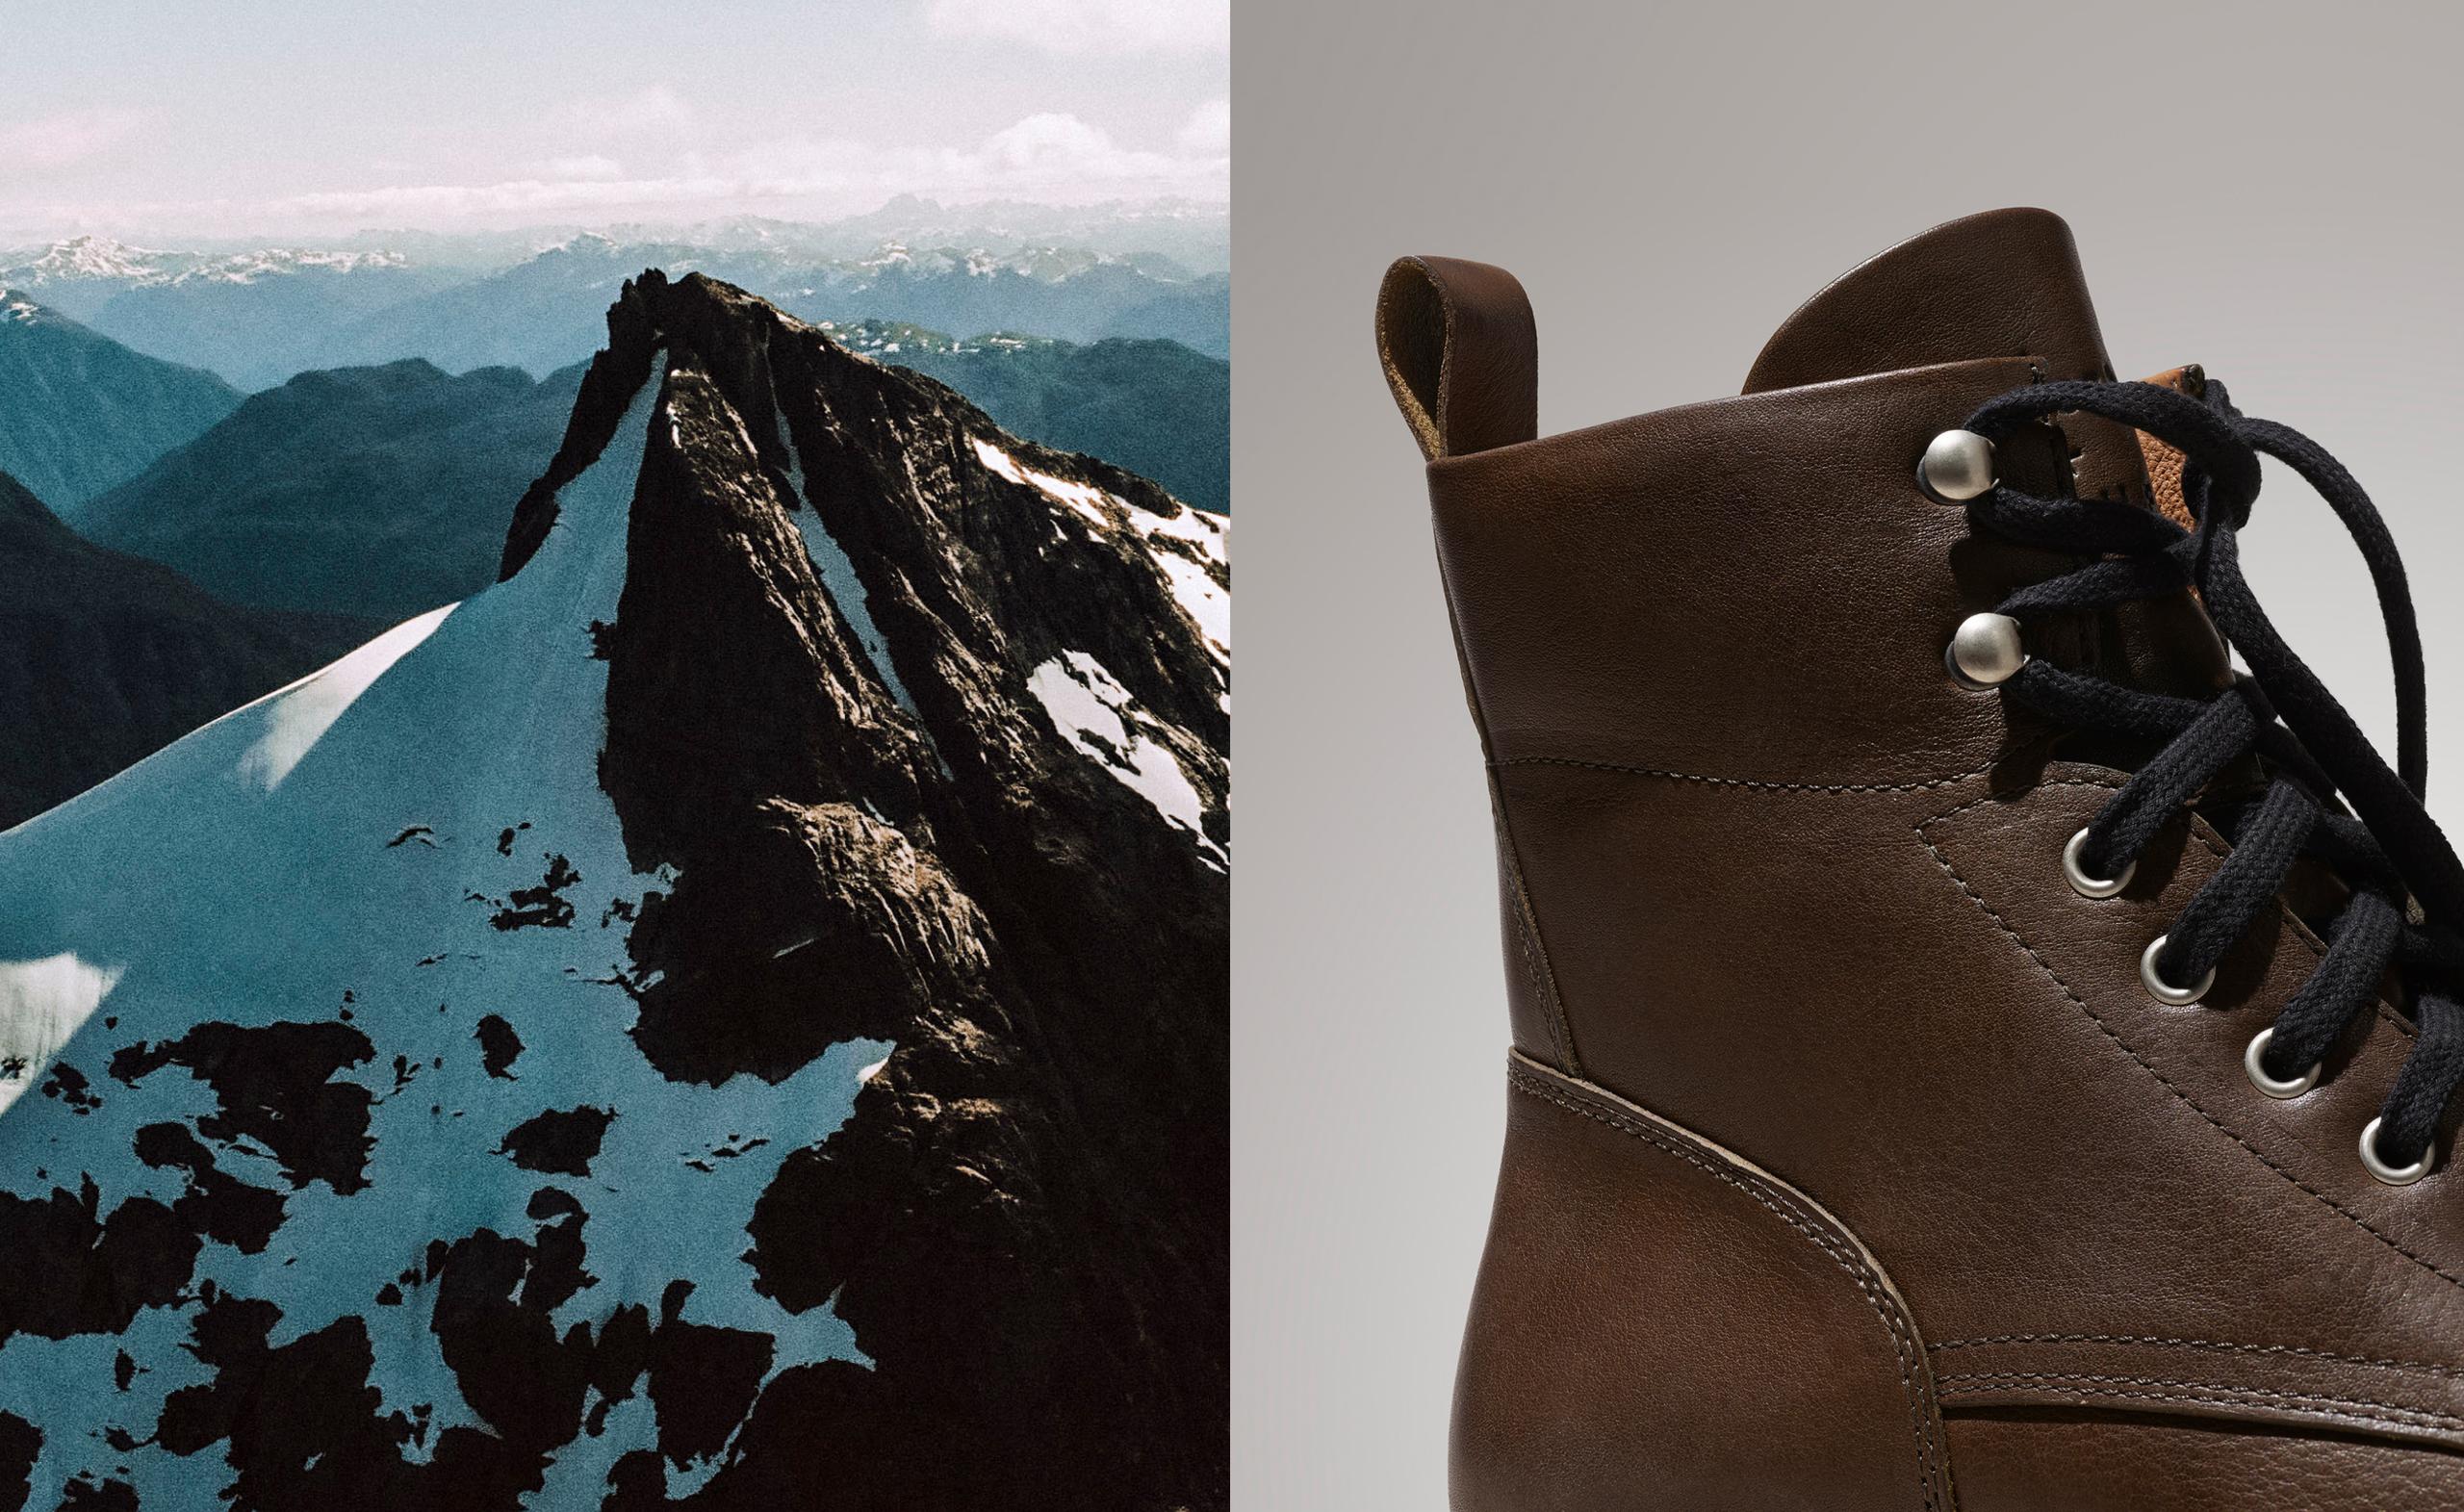 Snowy mountain peak in Patagonia juxtaposed next to a tight crop of the tall leather Canyon Boots